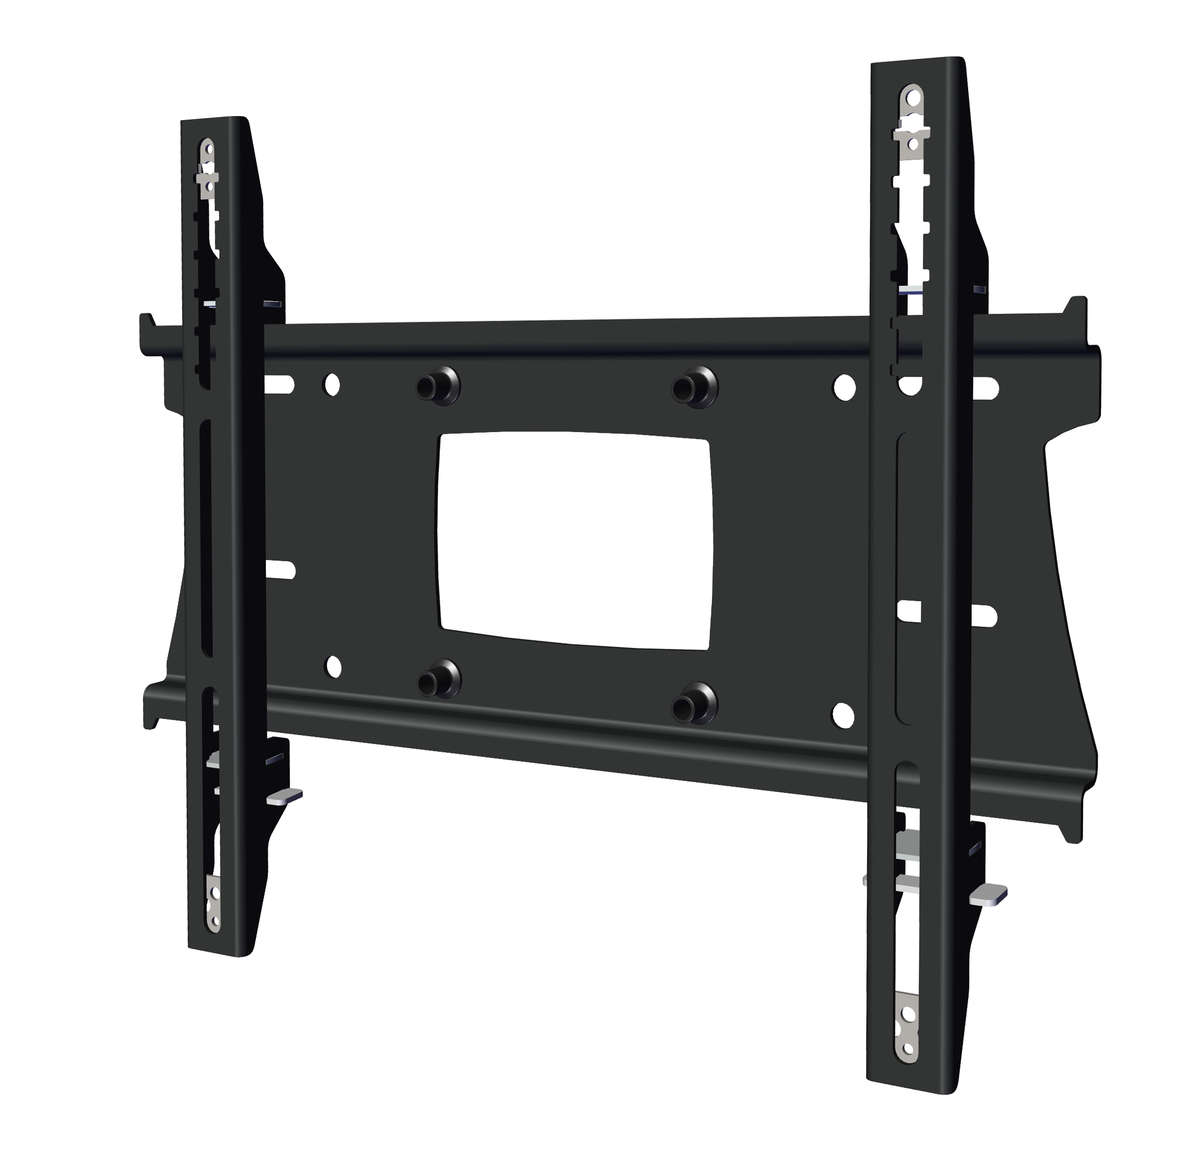 Unicol PZX3 Pozimount flat wall mount for monitors and TVs from 33 to 70 inches product image